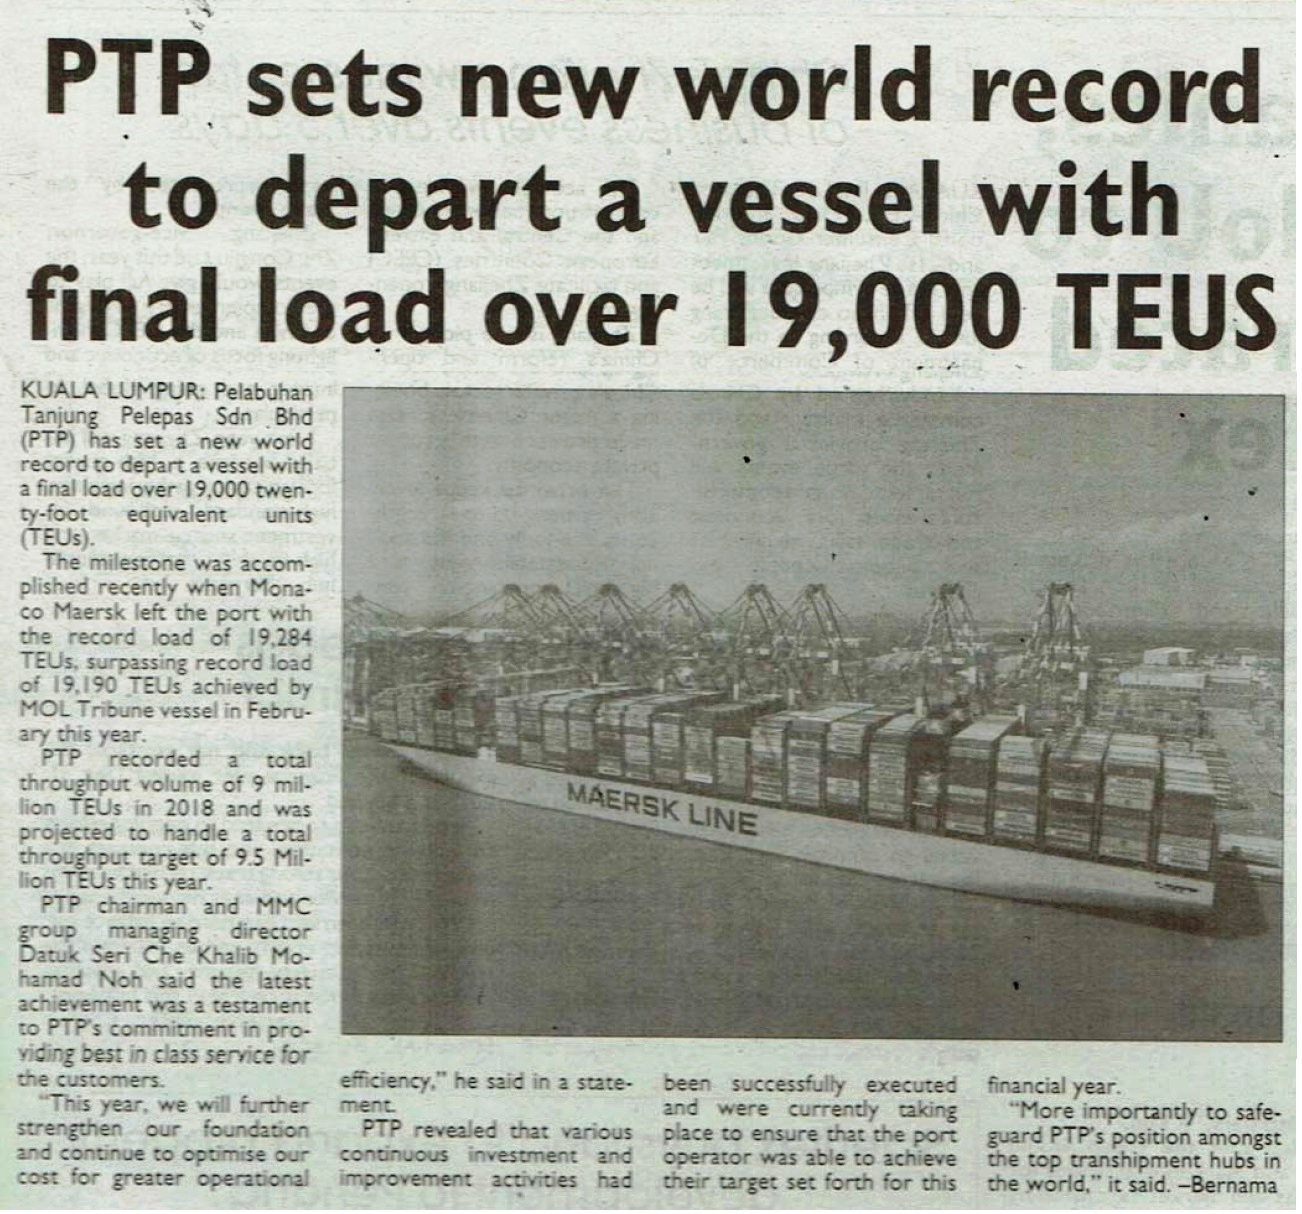 20190612-PTP-Sets-New-World-record-to-depart-a-vessel-with-final-load-over-19,000-TEUS-New-Sabah-Times-English-(KK).jpg